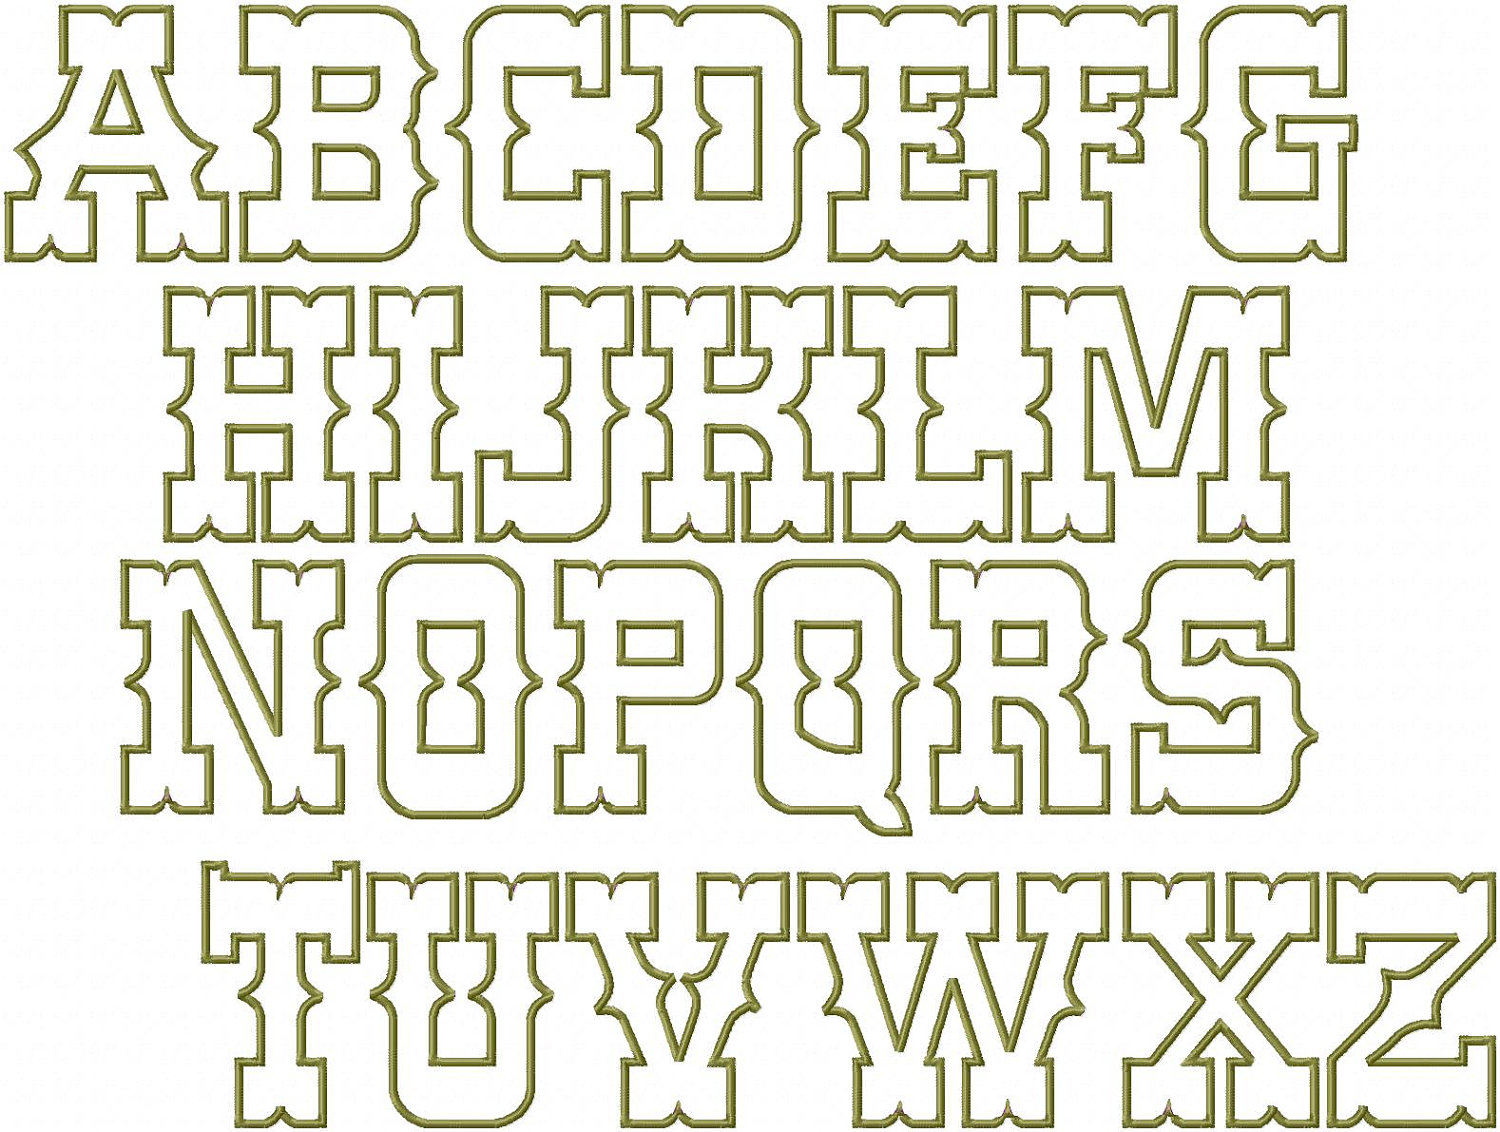 6-best-images-of-western-fonts-and-free-printable-letters-western